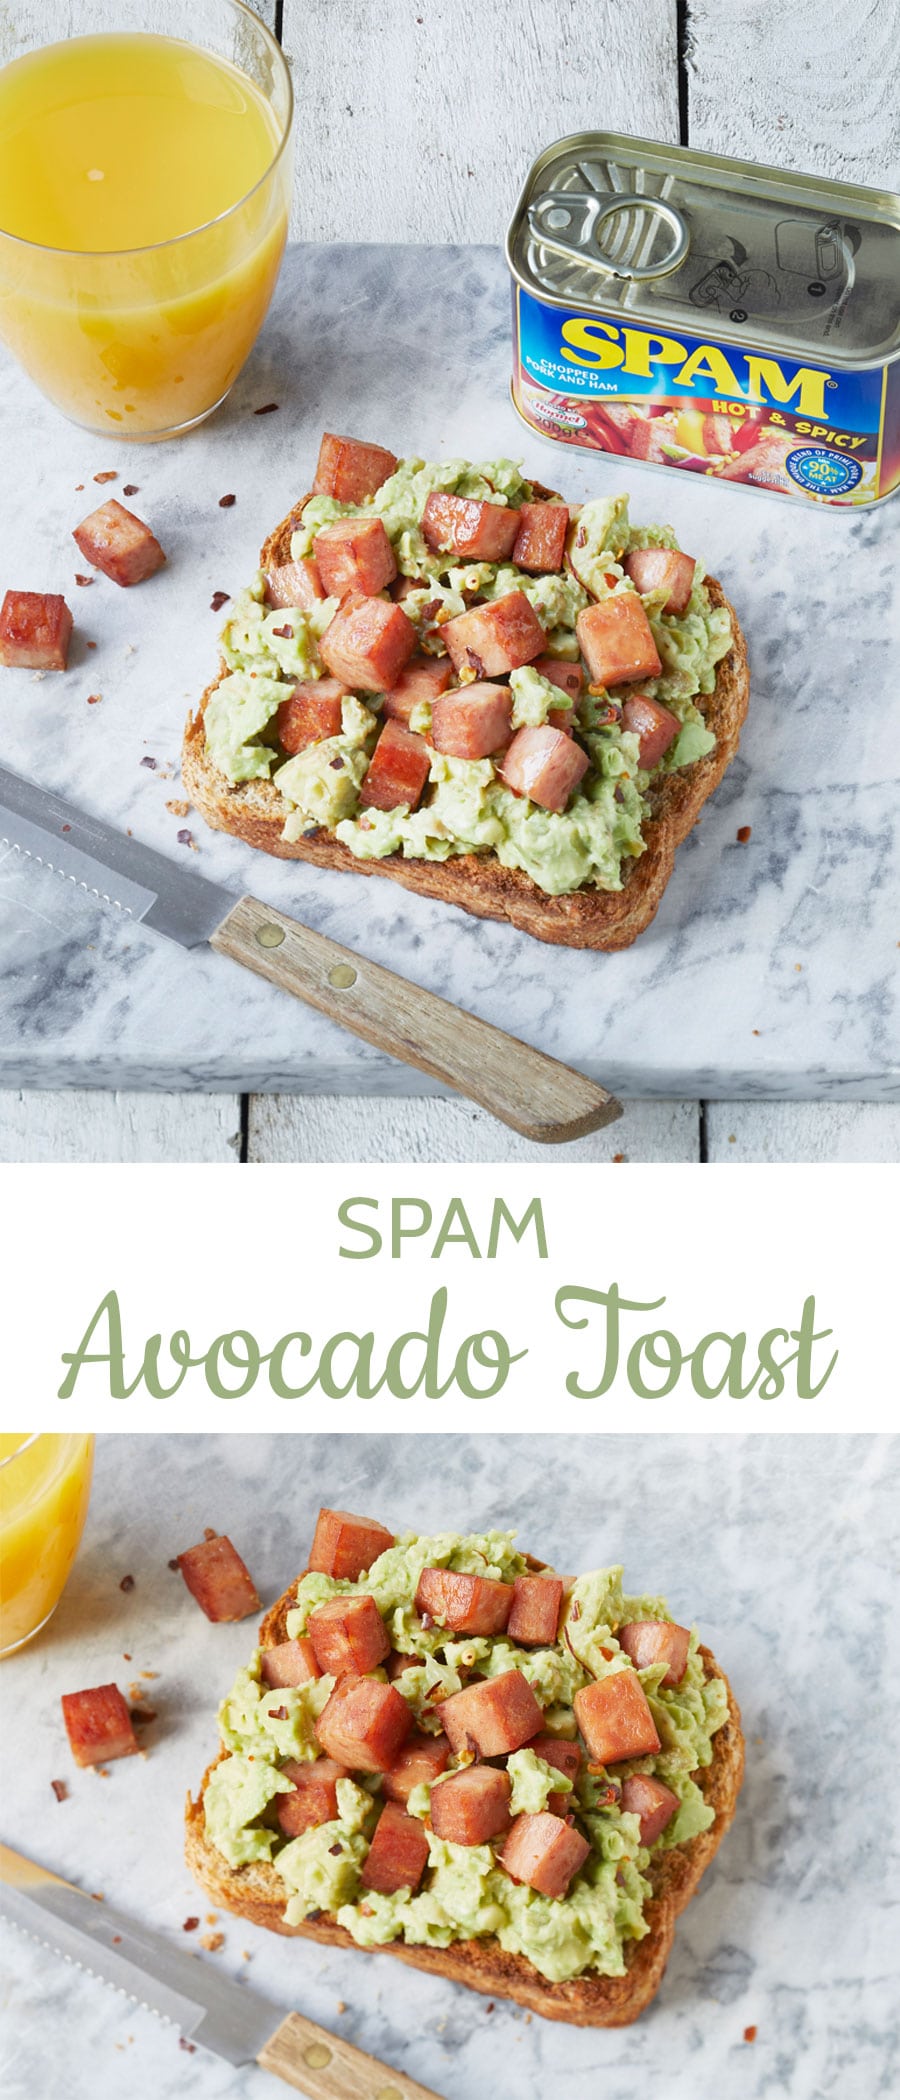 Chunks of spam on top of creamy mashed avocado and toasted bread with text overlay